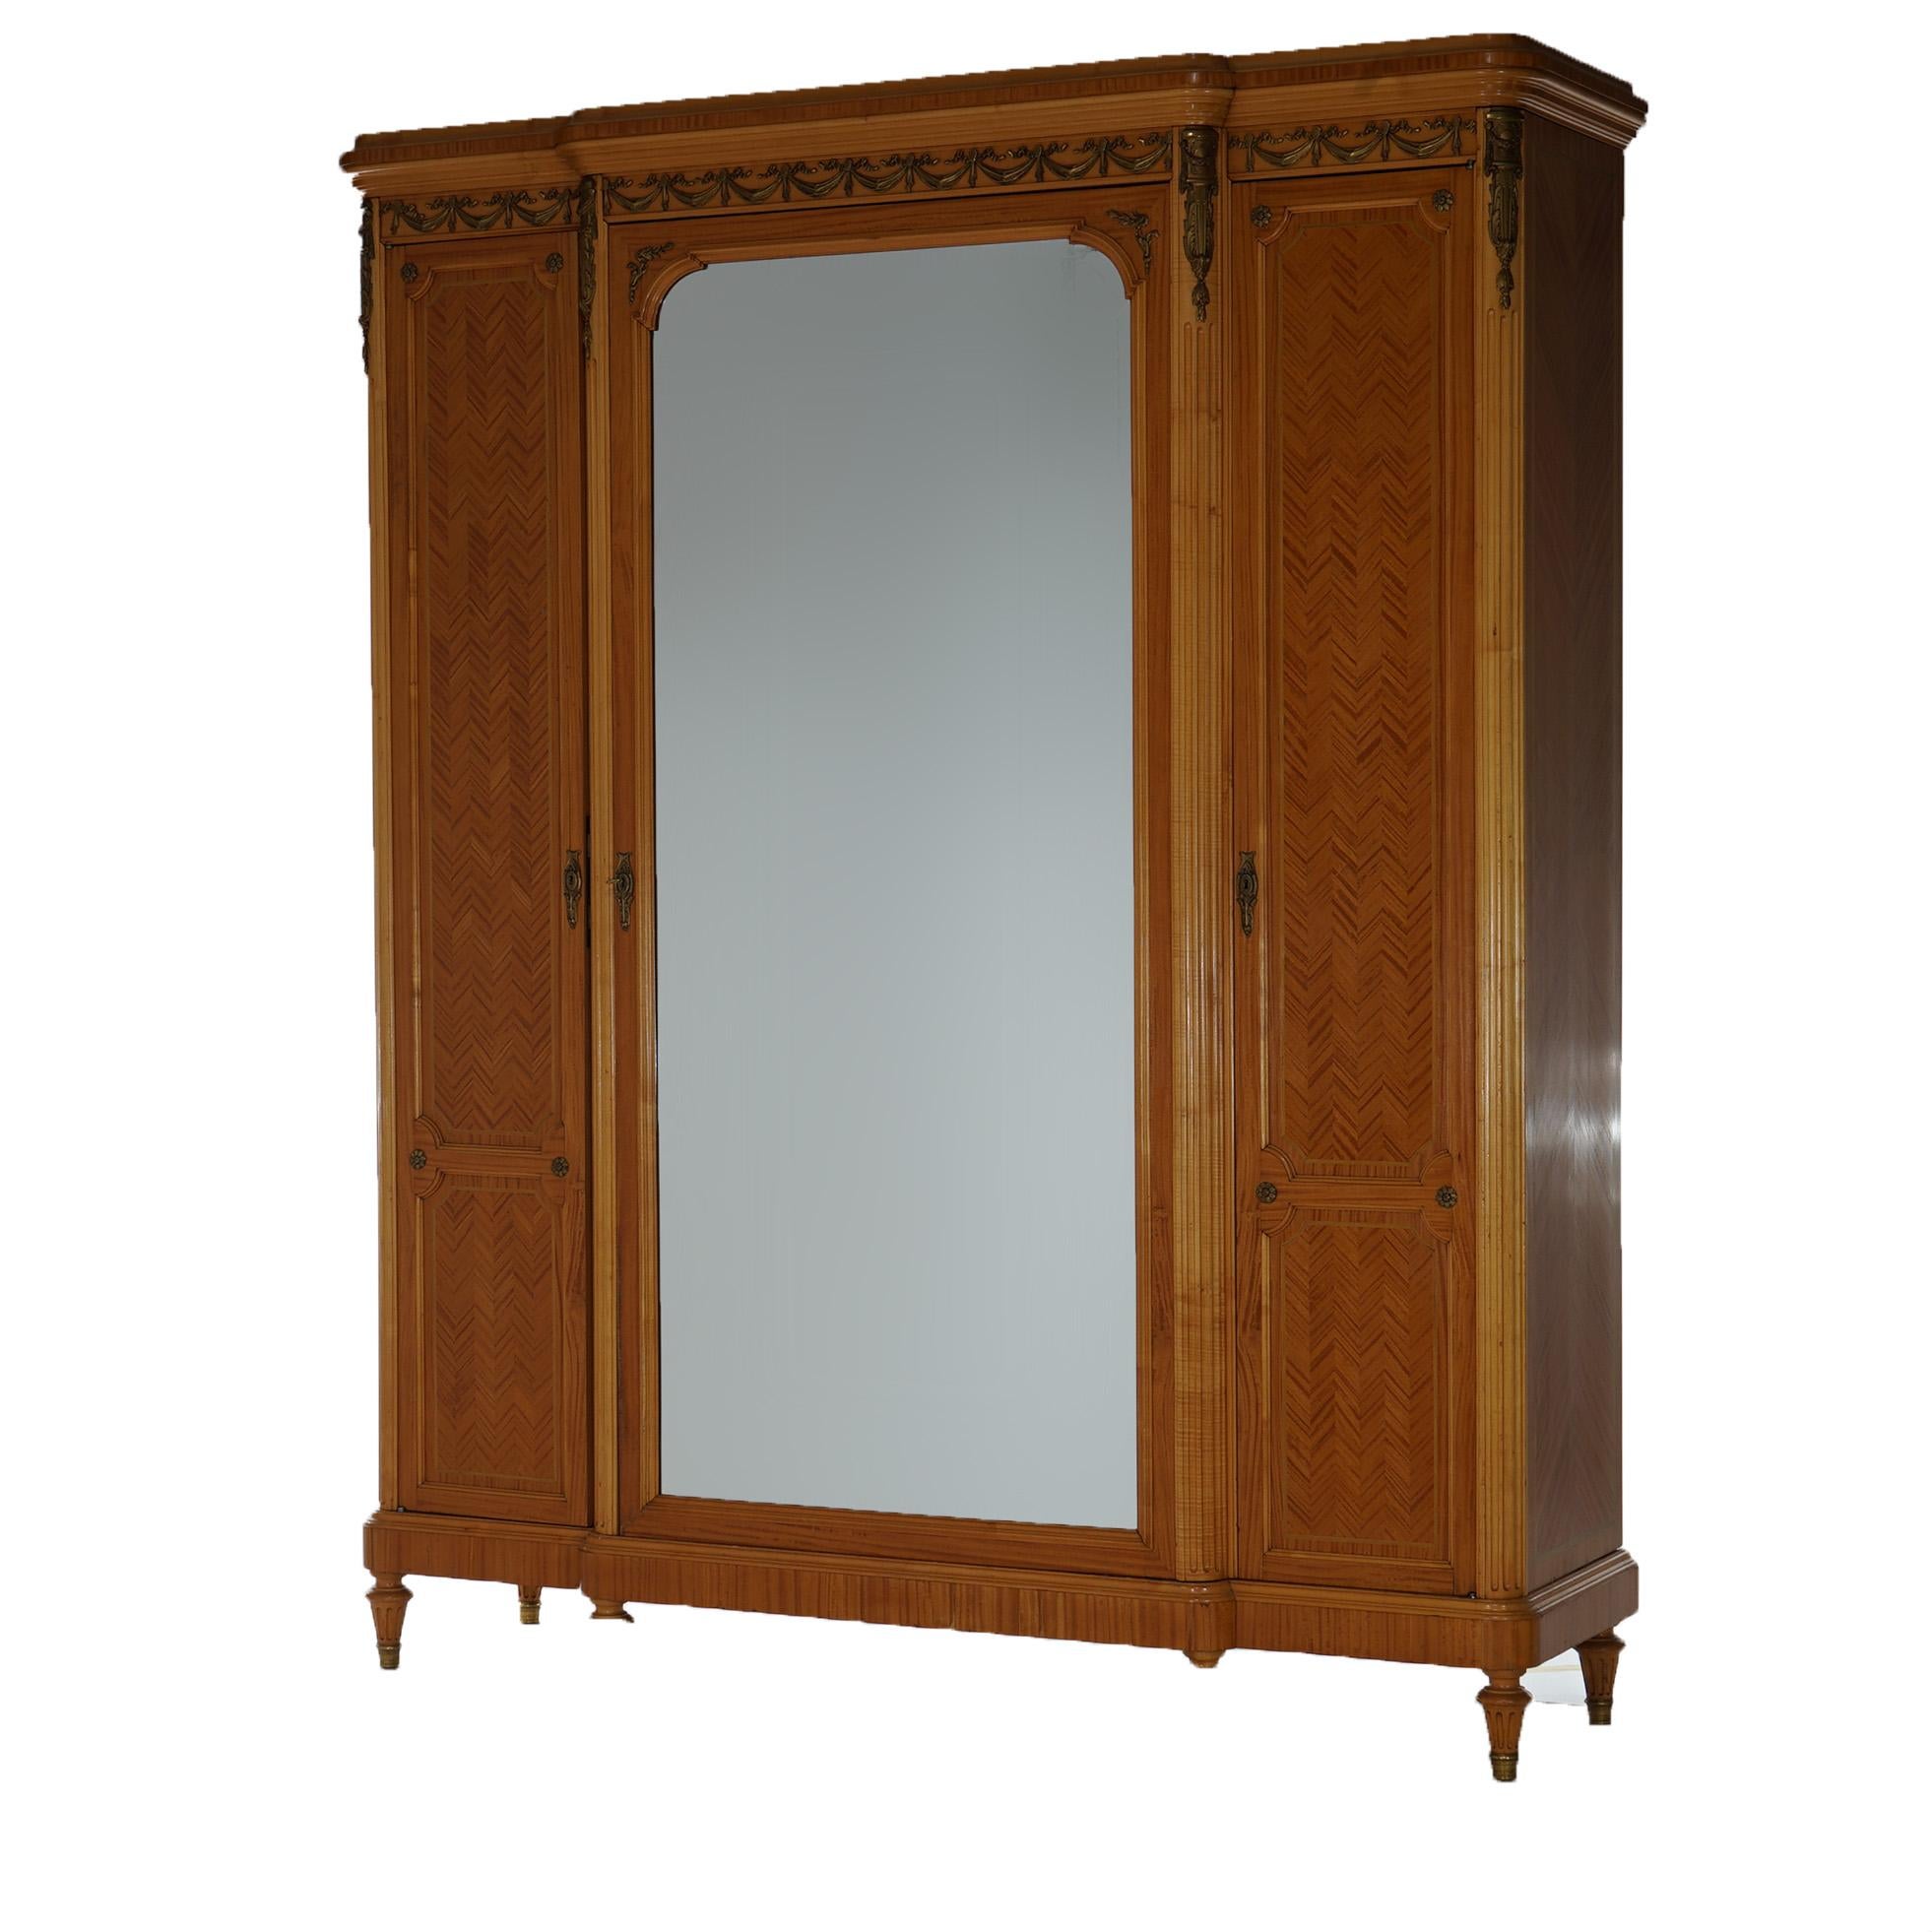 20th Century Large Antique French Louis XIV Style Satinwood & Ormolu Mirrored Armoire, C1890 For Sale